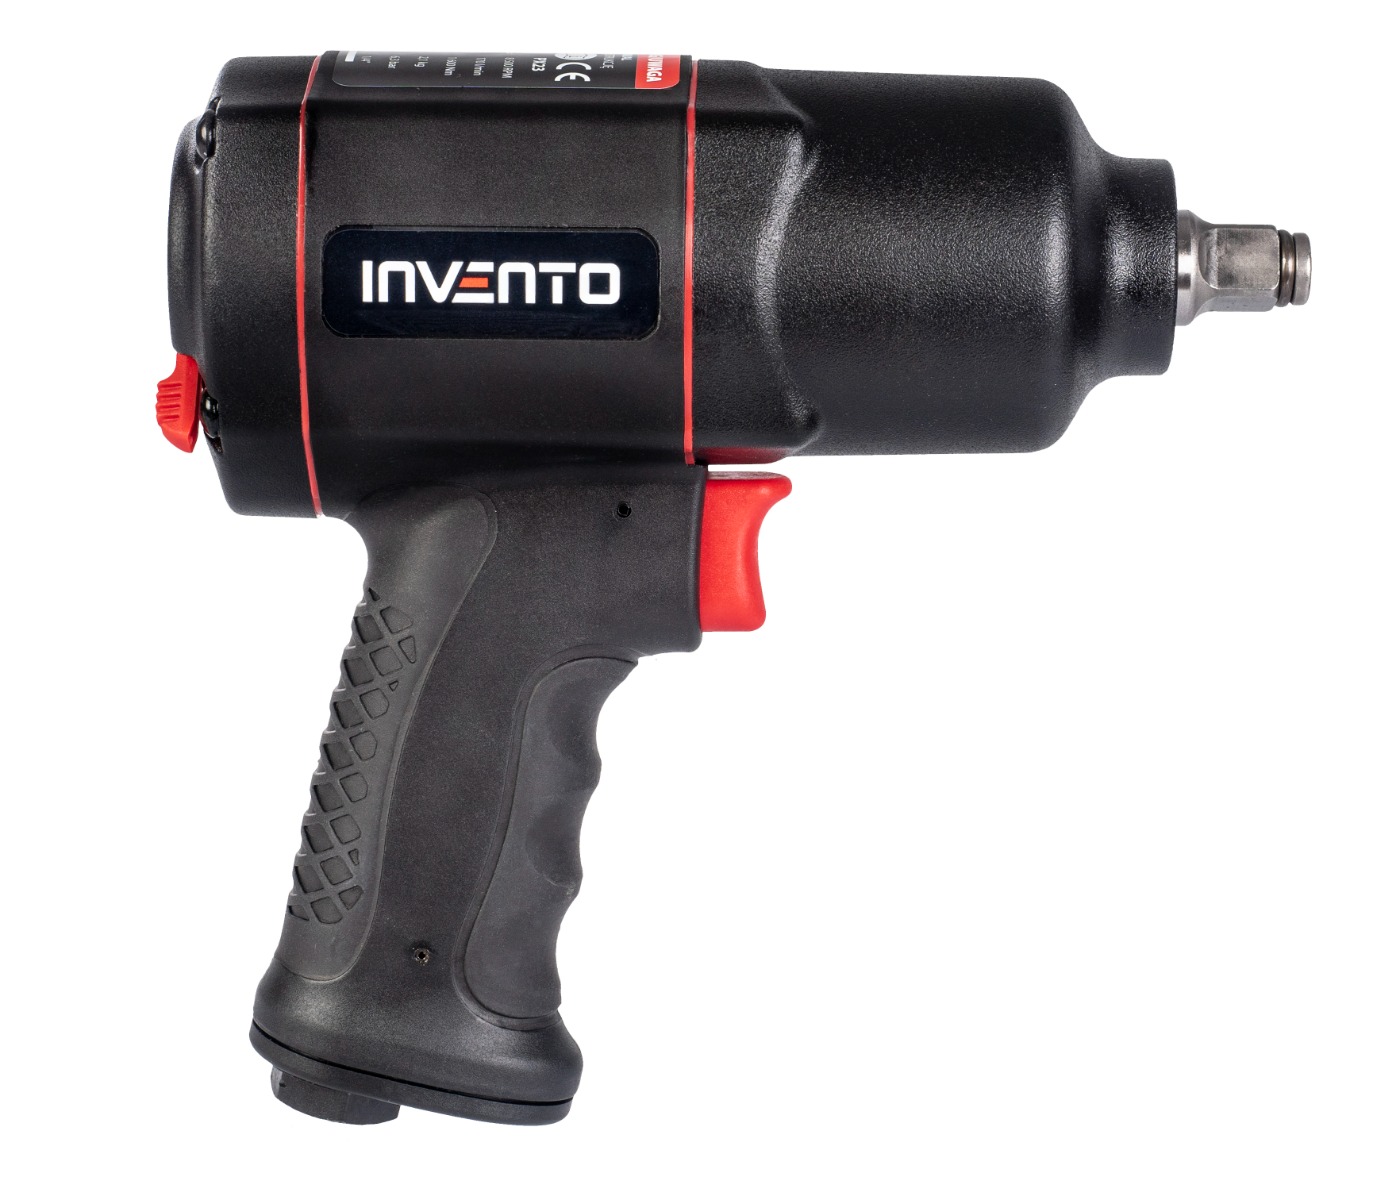 INVENTO 1/2″ pneumatic impact wrench, 1600 Nm